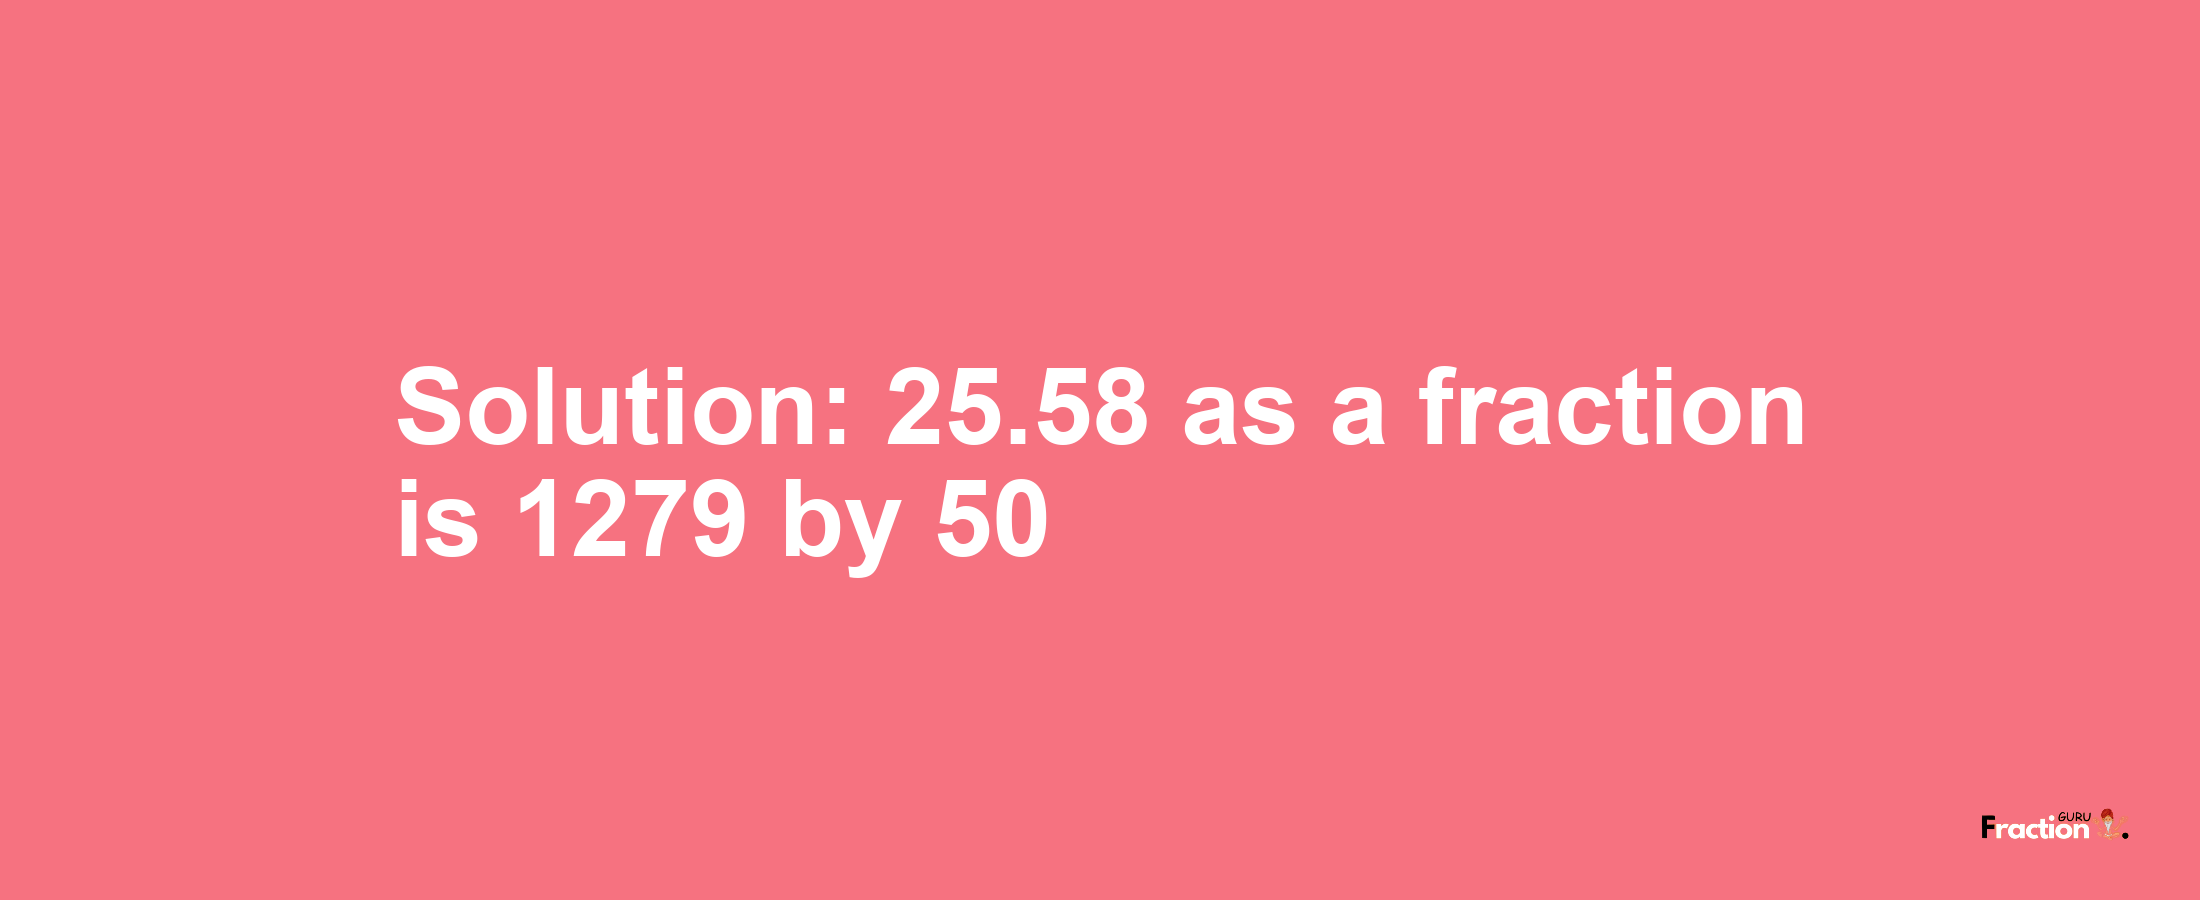 Solution:25.58 as a fraction is 1279/50